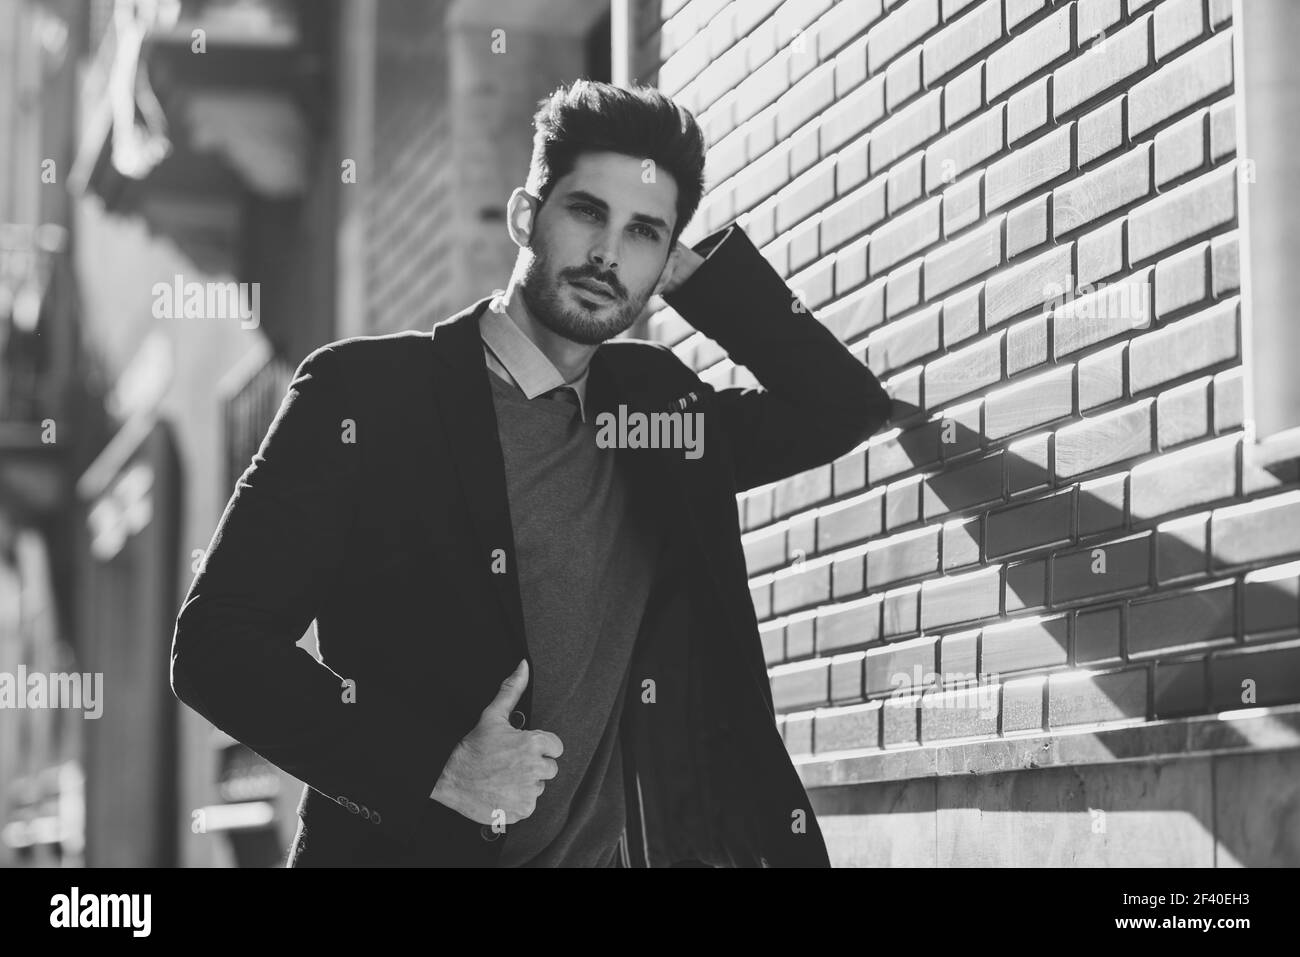 Attractive man in the street wearing british elegant suit. Young bearded businessman with modern hairstyle in urban background. Black and white photograph. Stock Photo